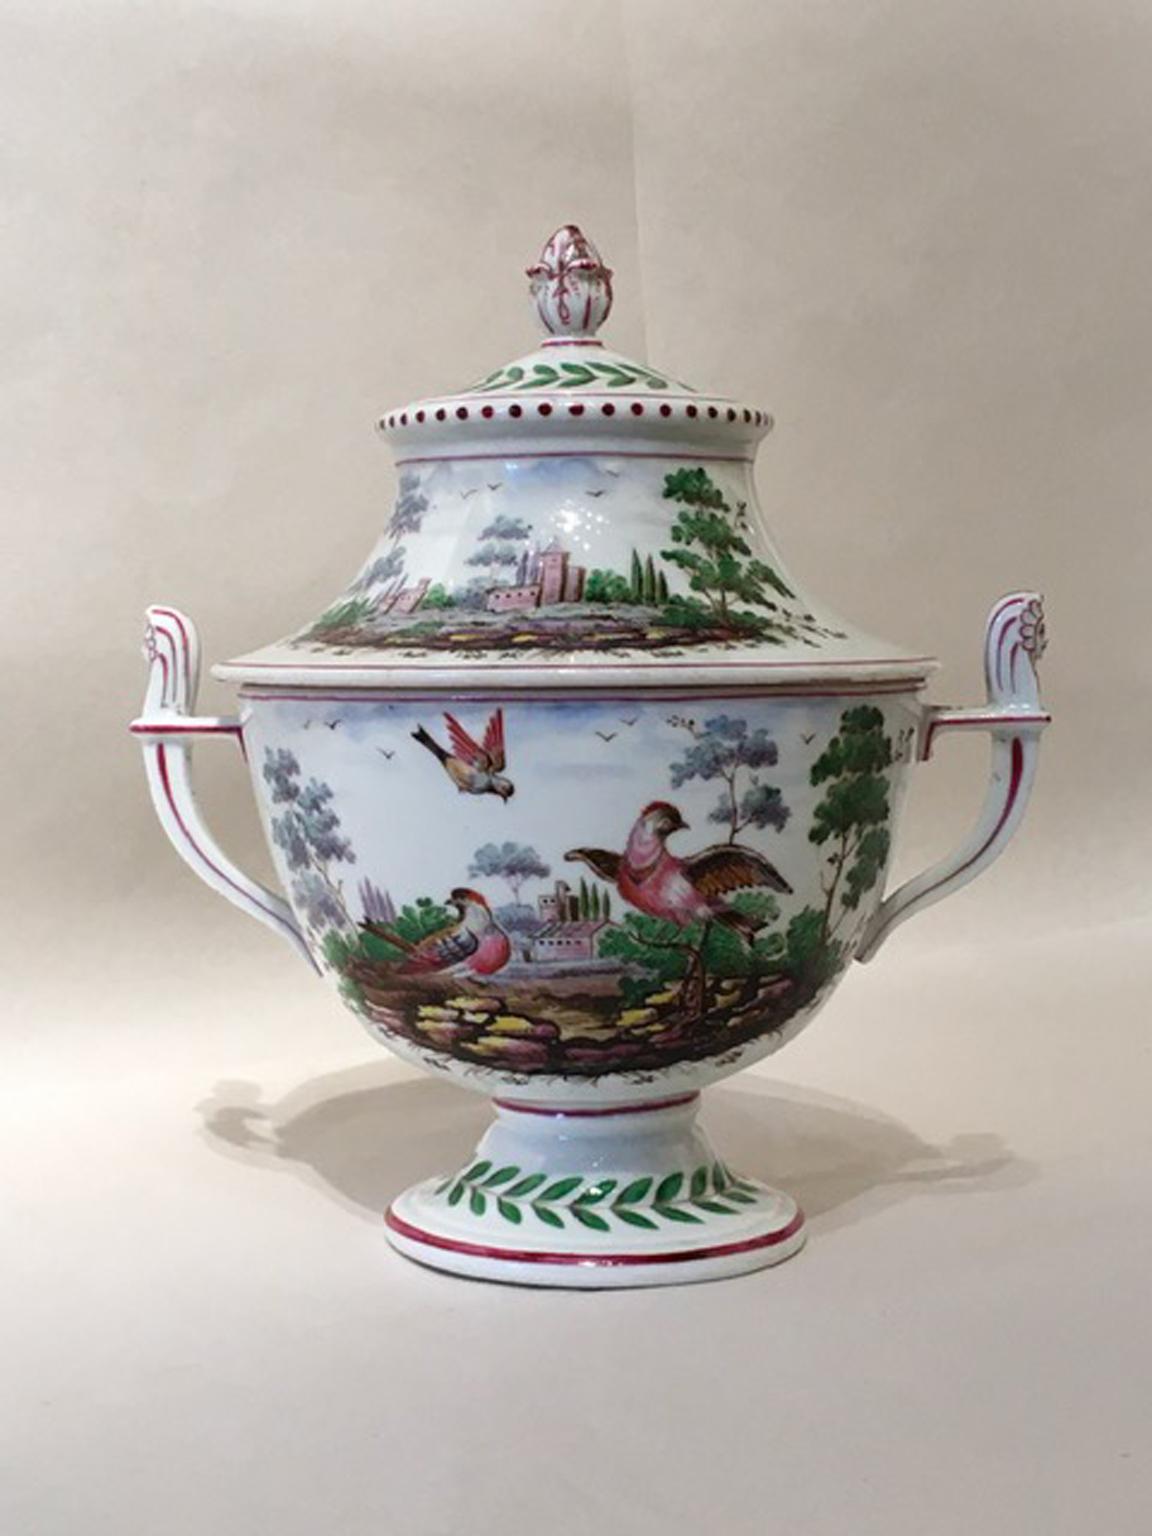 This glamorous covered vase or urn, it is painted with natural landscapes. The drawings are so detailed that we can say done in Flemish style. We can see a landscape with houses and castles at the orizont, and in another scene, birds and games.